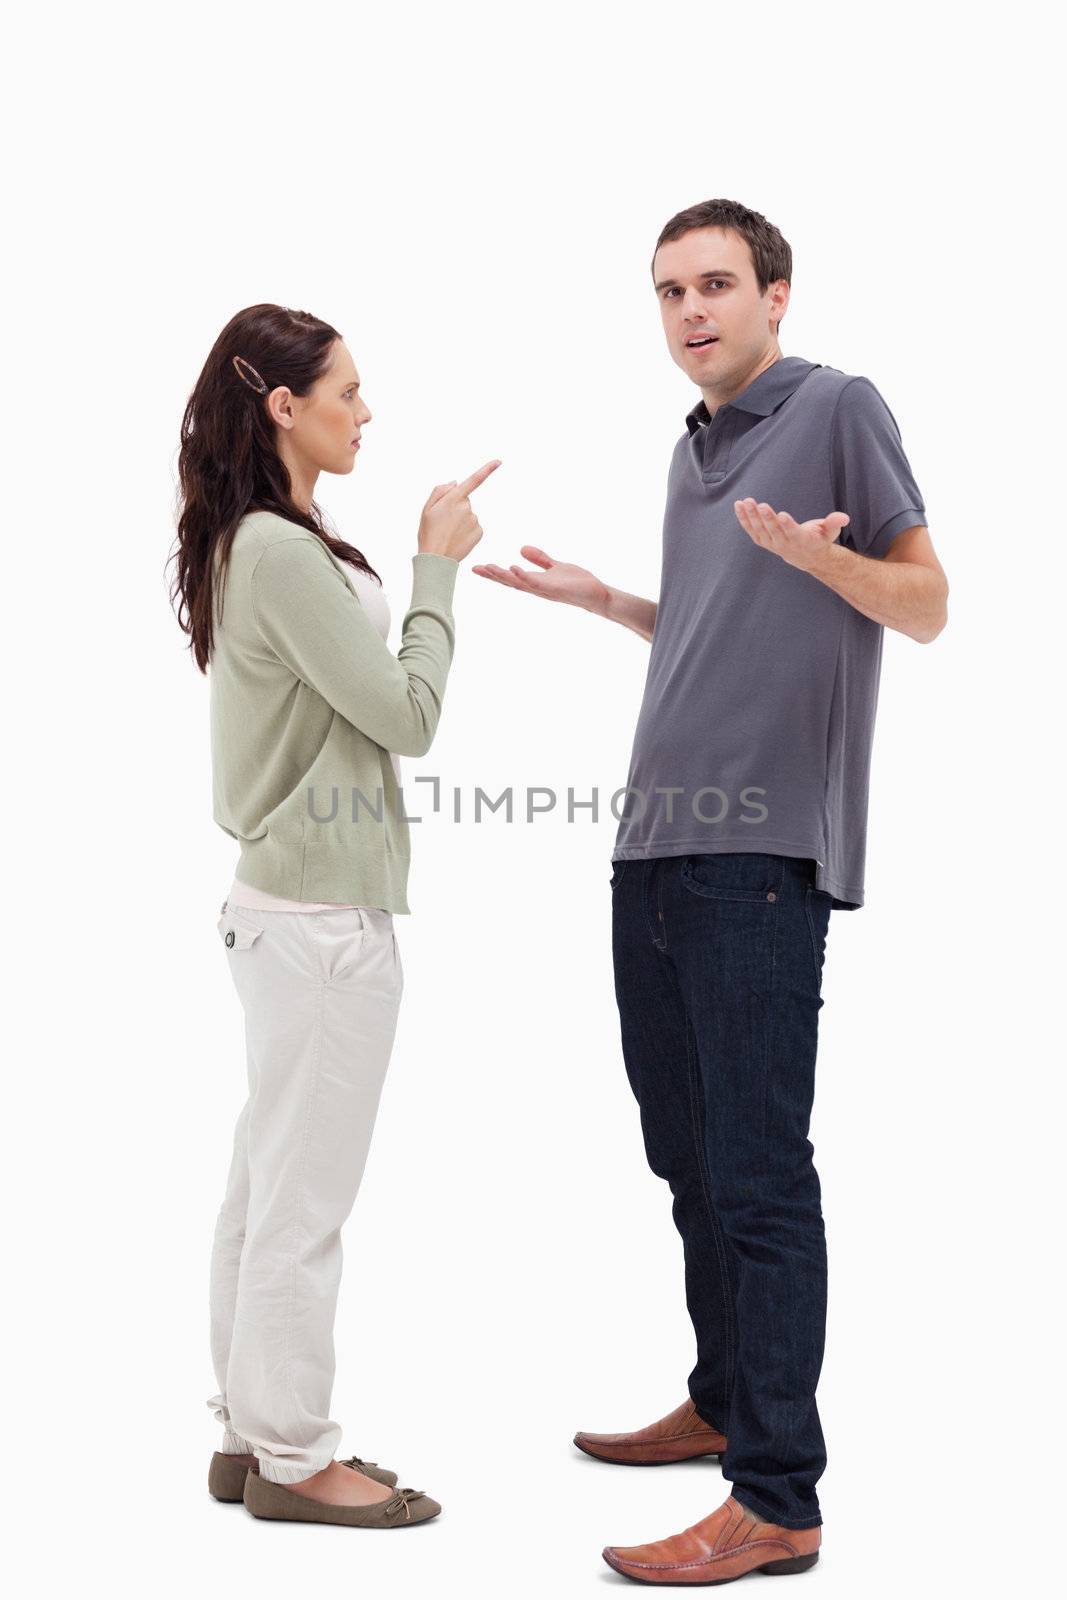 Man shrugged his shoulders is scolded by woman against white background